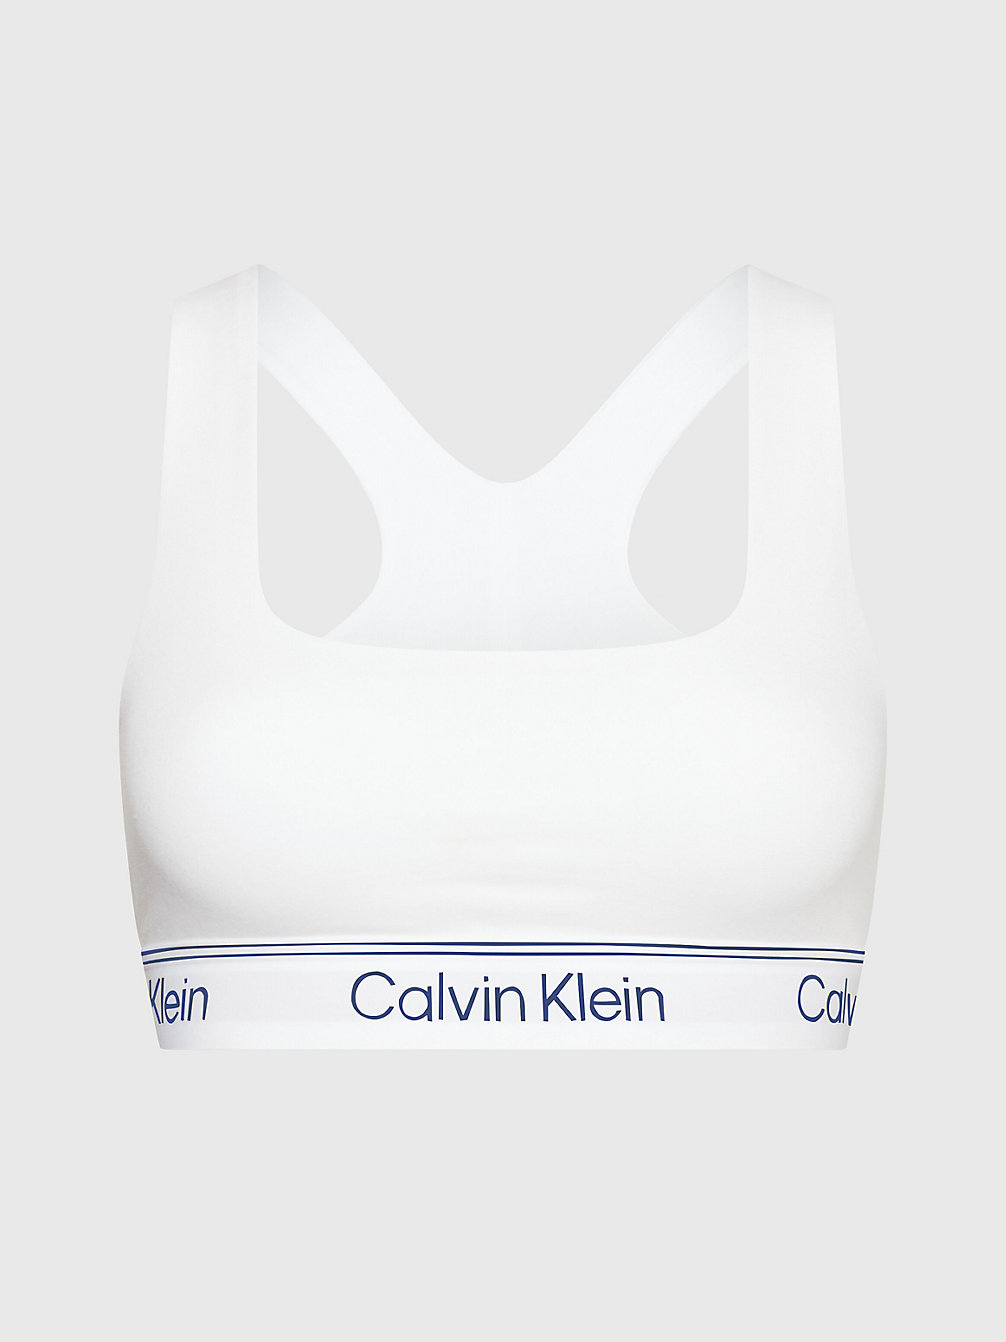 Corpiño - Athletic Cotton > WHITE > undefined mujeres > Calvin Klein